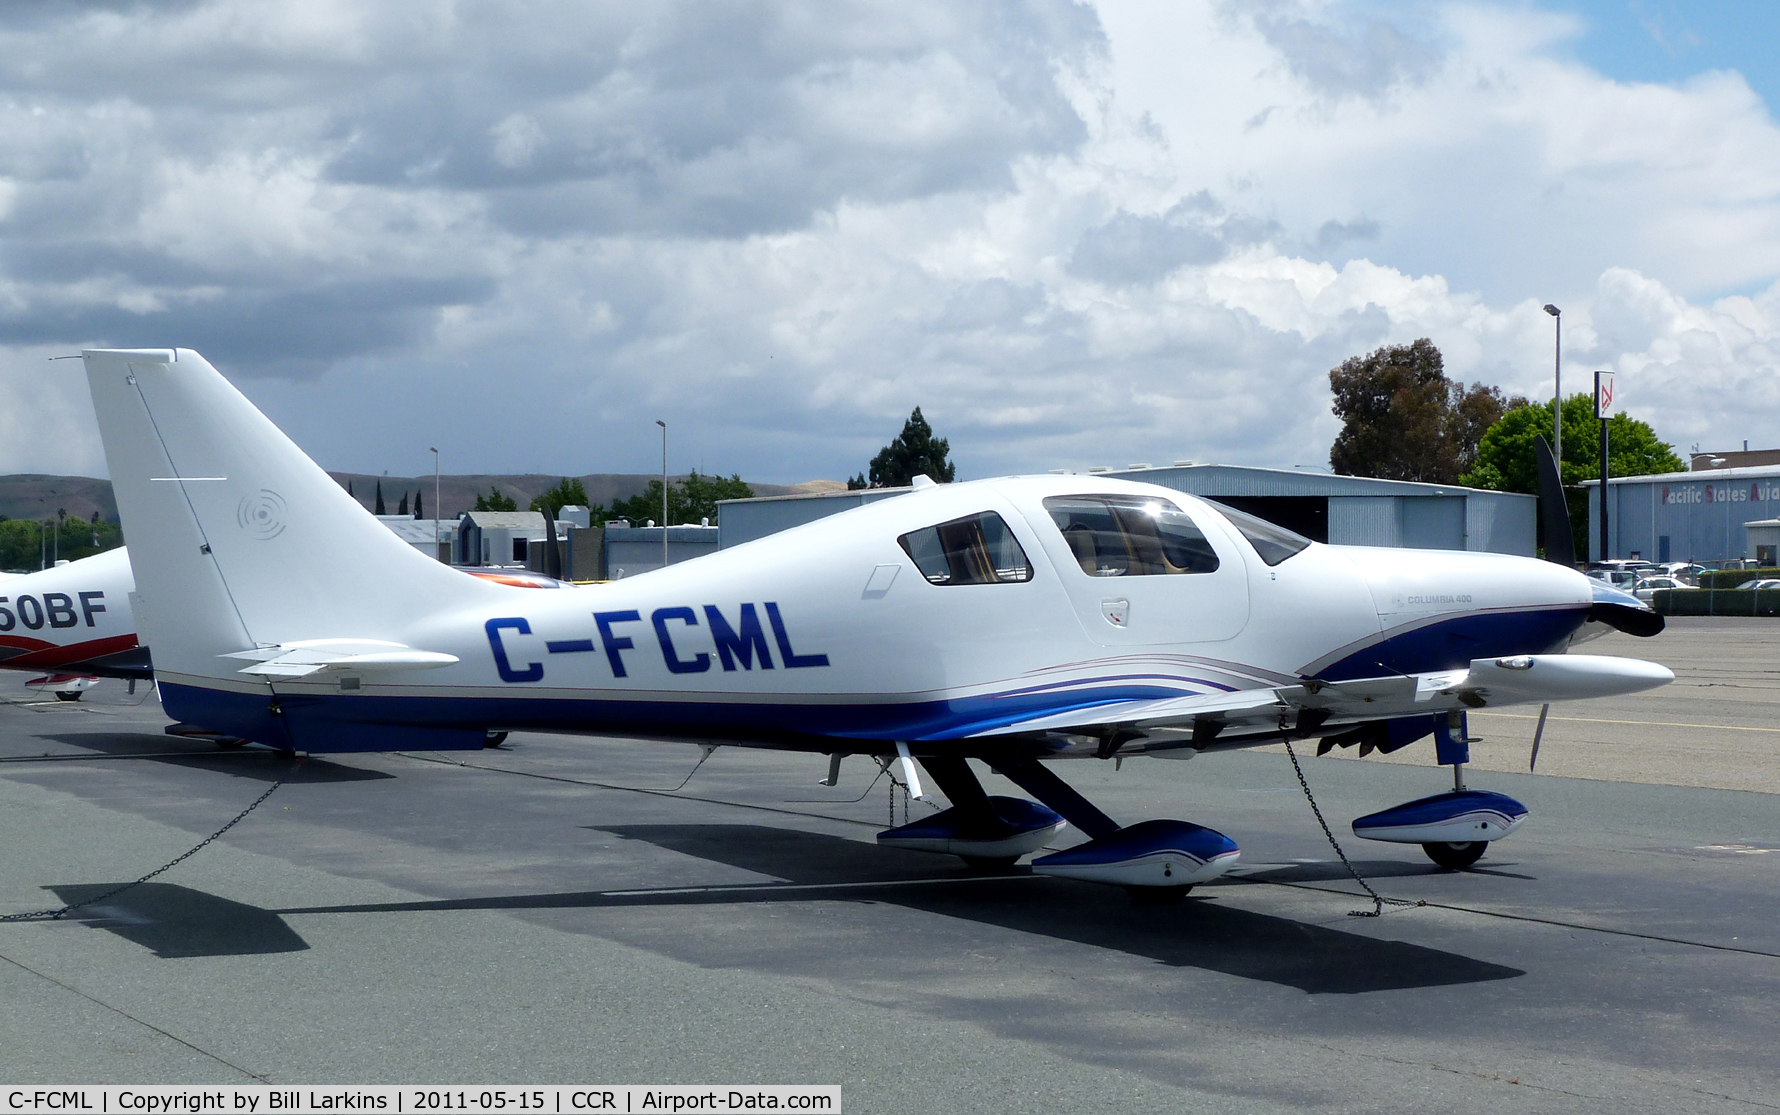 C-FCML, 2006 Columbia Aircraft Mfg LC41-550FG C/N 41566, Visitor from Canada.